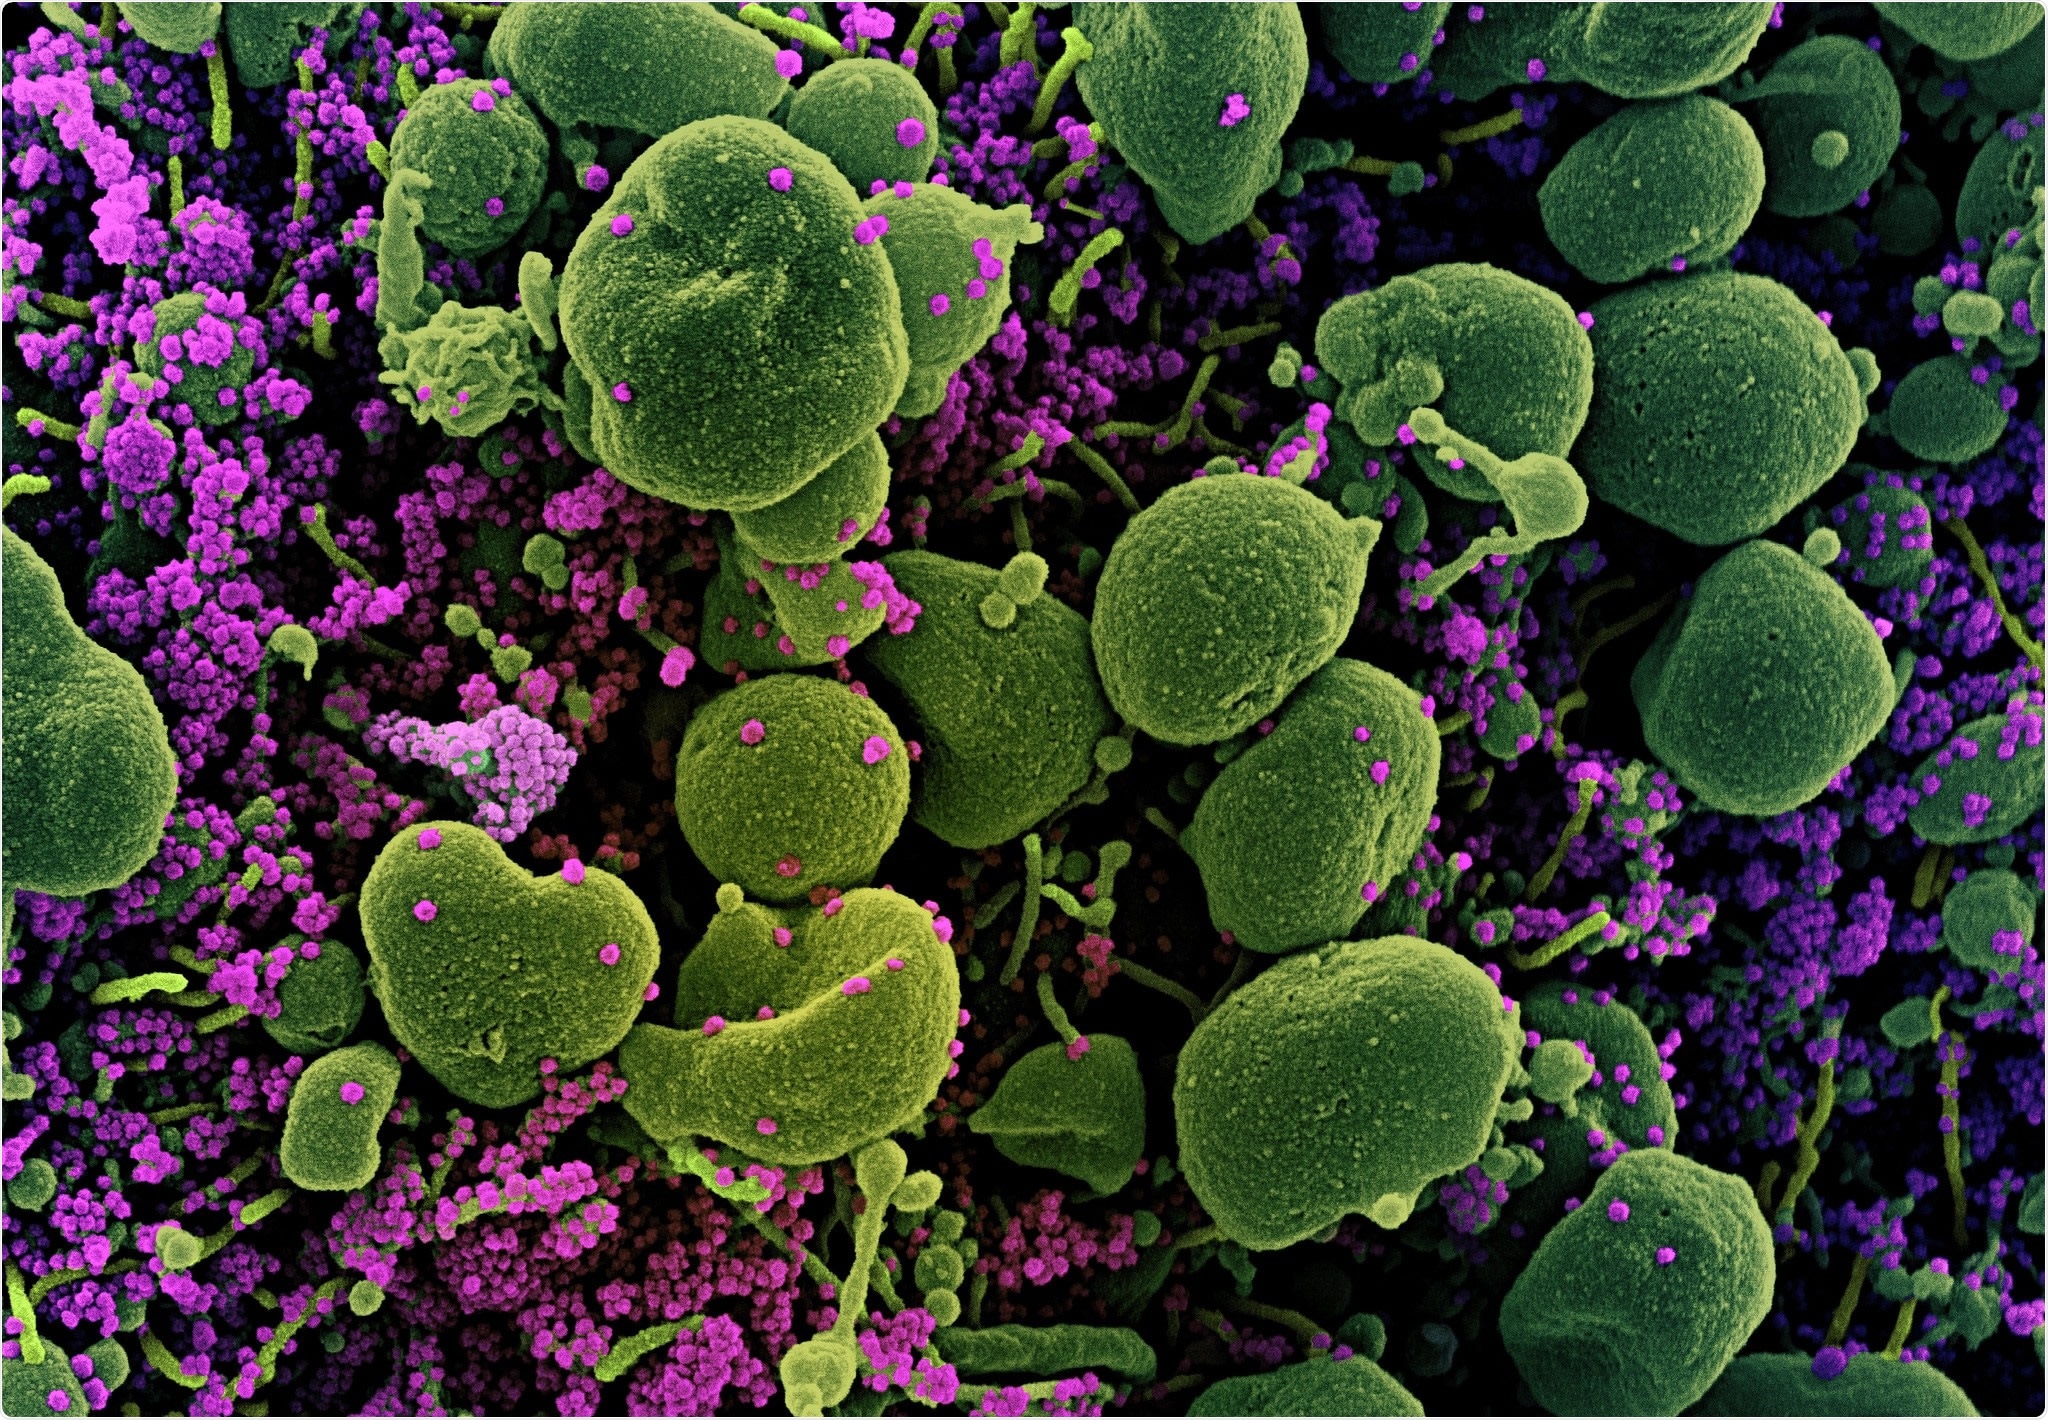 Colorized scanning electron micrograph of an apoptotic cell (green) heavily infected with SARS-CoV-2 virus particles (purple), isolated from a patient sample. Image captured at the NIAID Integrated Research Facility (IRF) in Fort Detrick, Maryland. Credit: NIAID